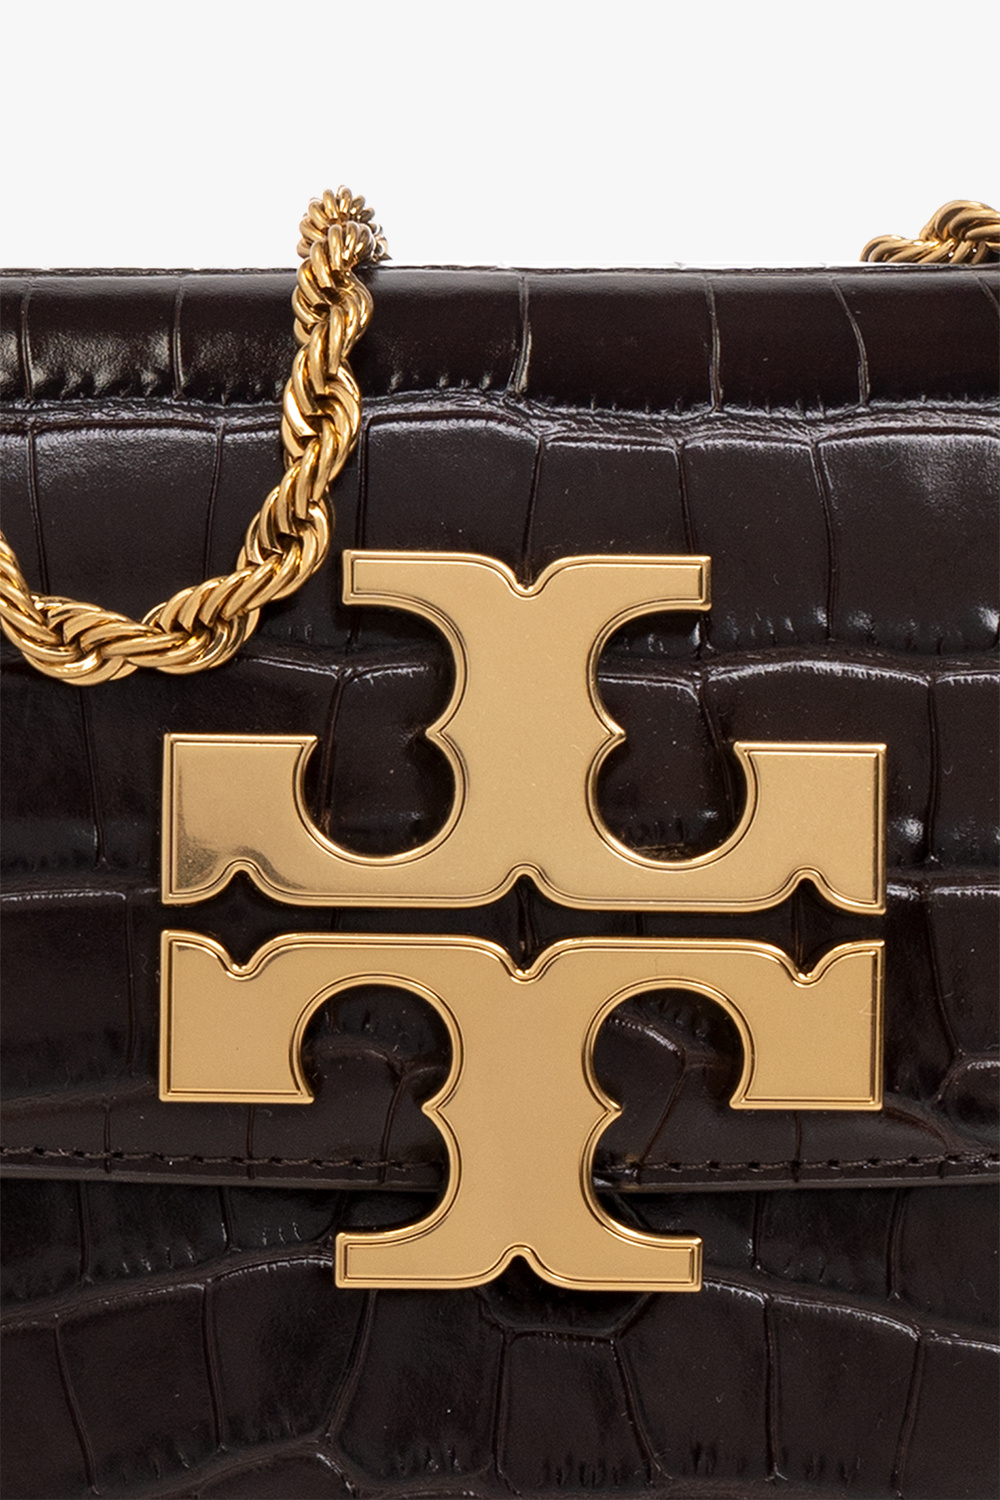 Tory Burch ‘Eleonora Small’ shoulder LEATHER bag